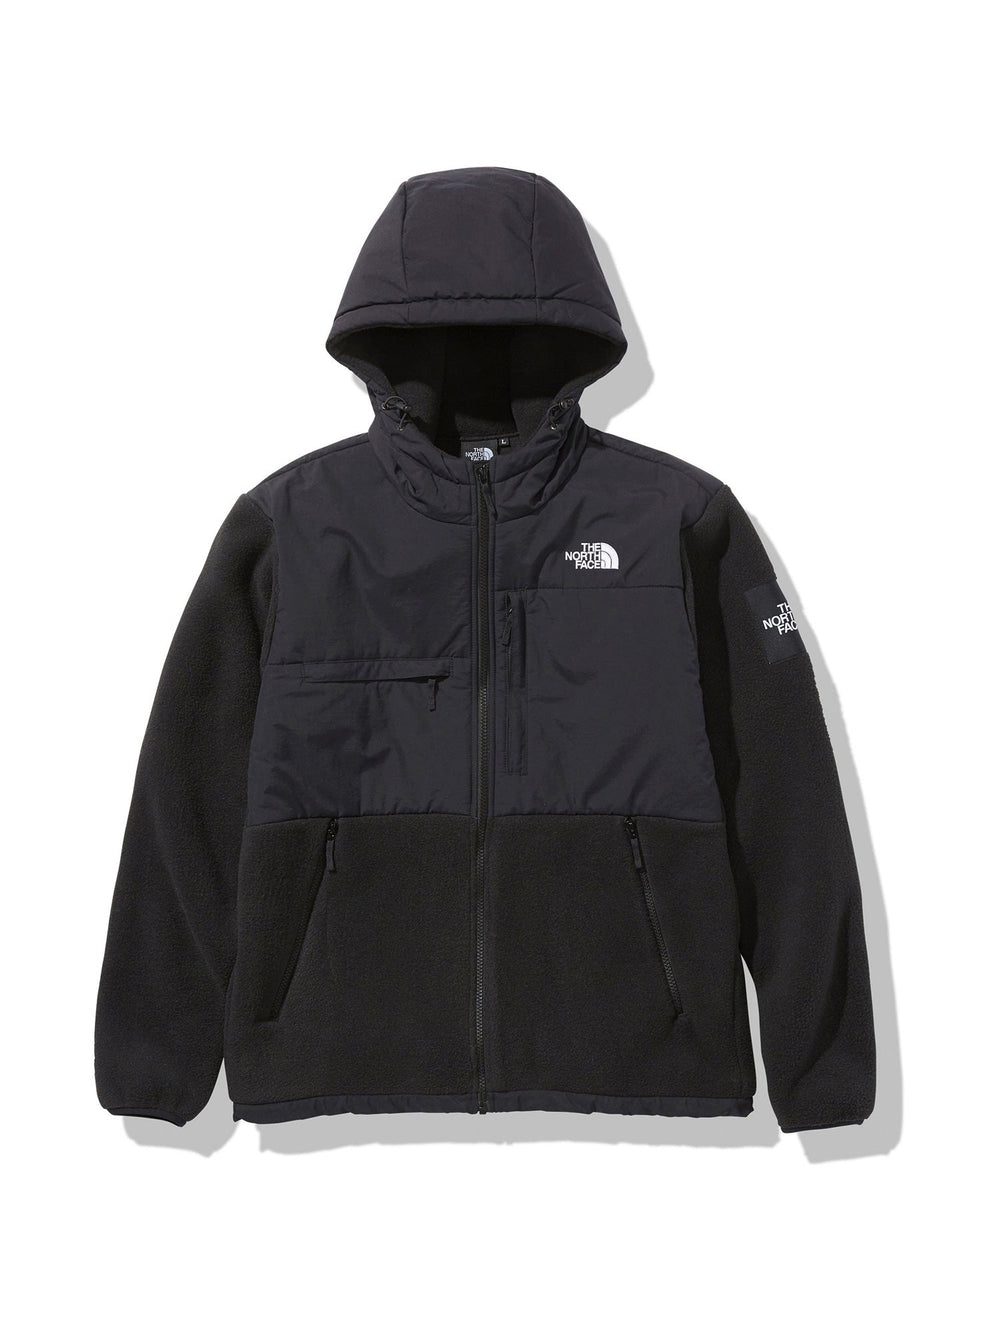 [THE NORTH FACE] Denali Hoody / The North Face Men's Outdoor